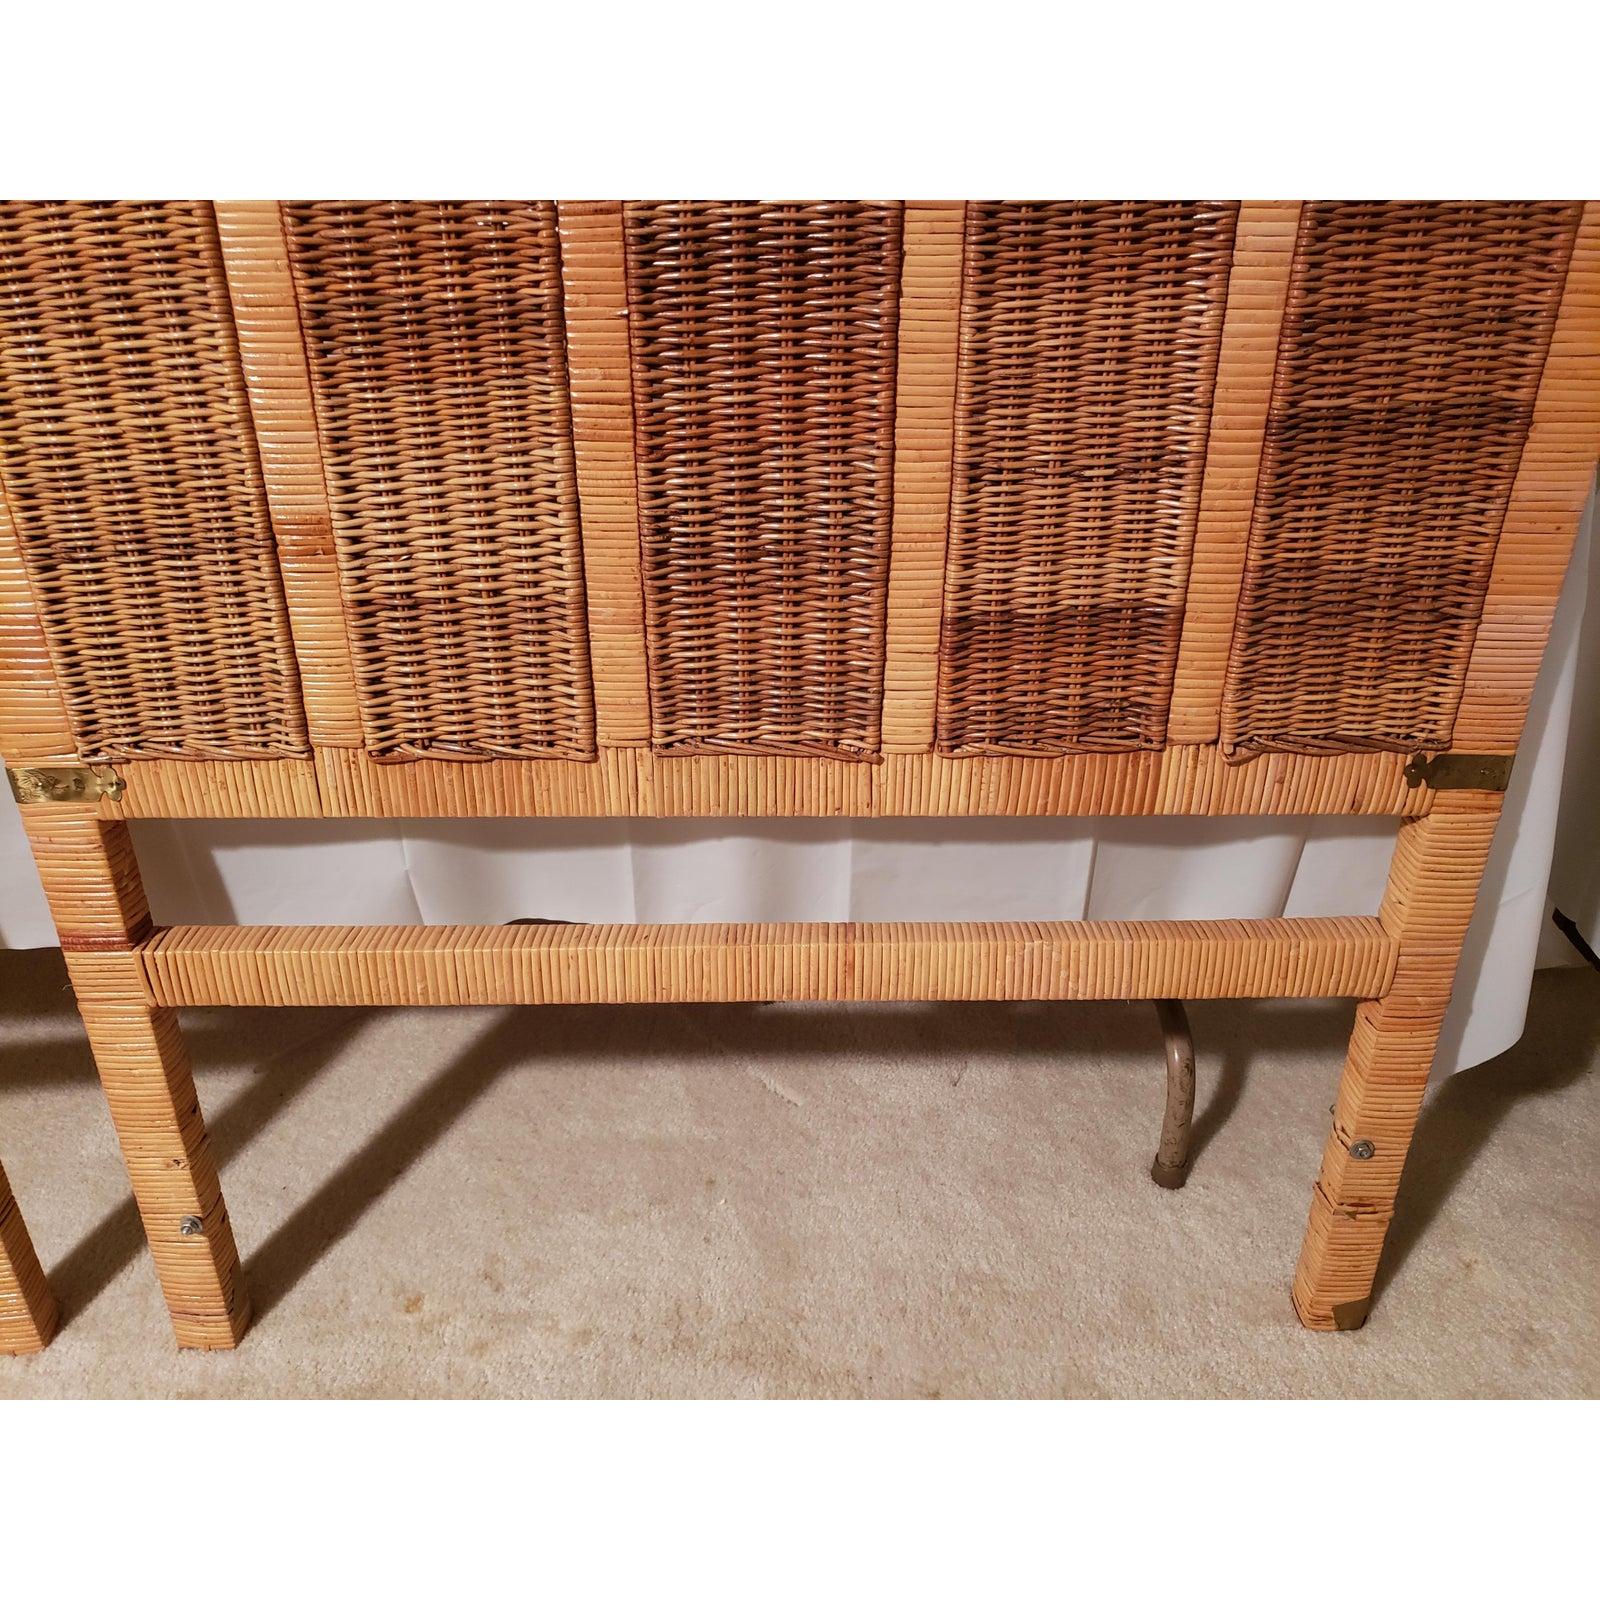 20th Century 1970s Asian Modern Rattan Wicker Twin Headboards with Brass Fittings, a Pair